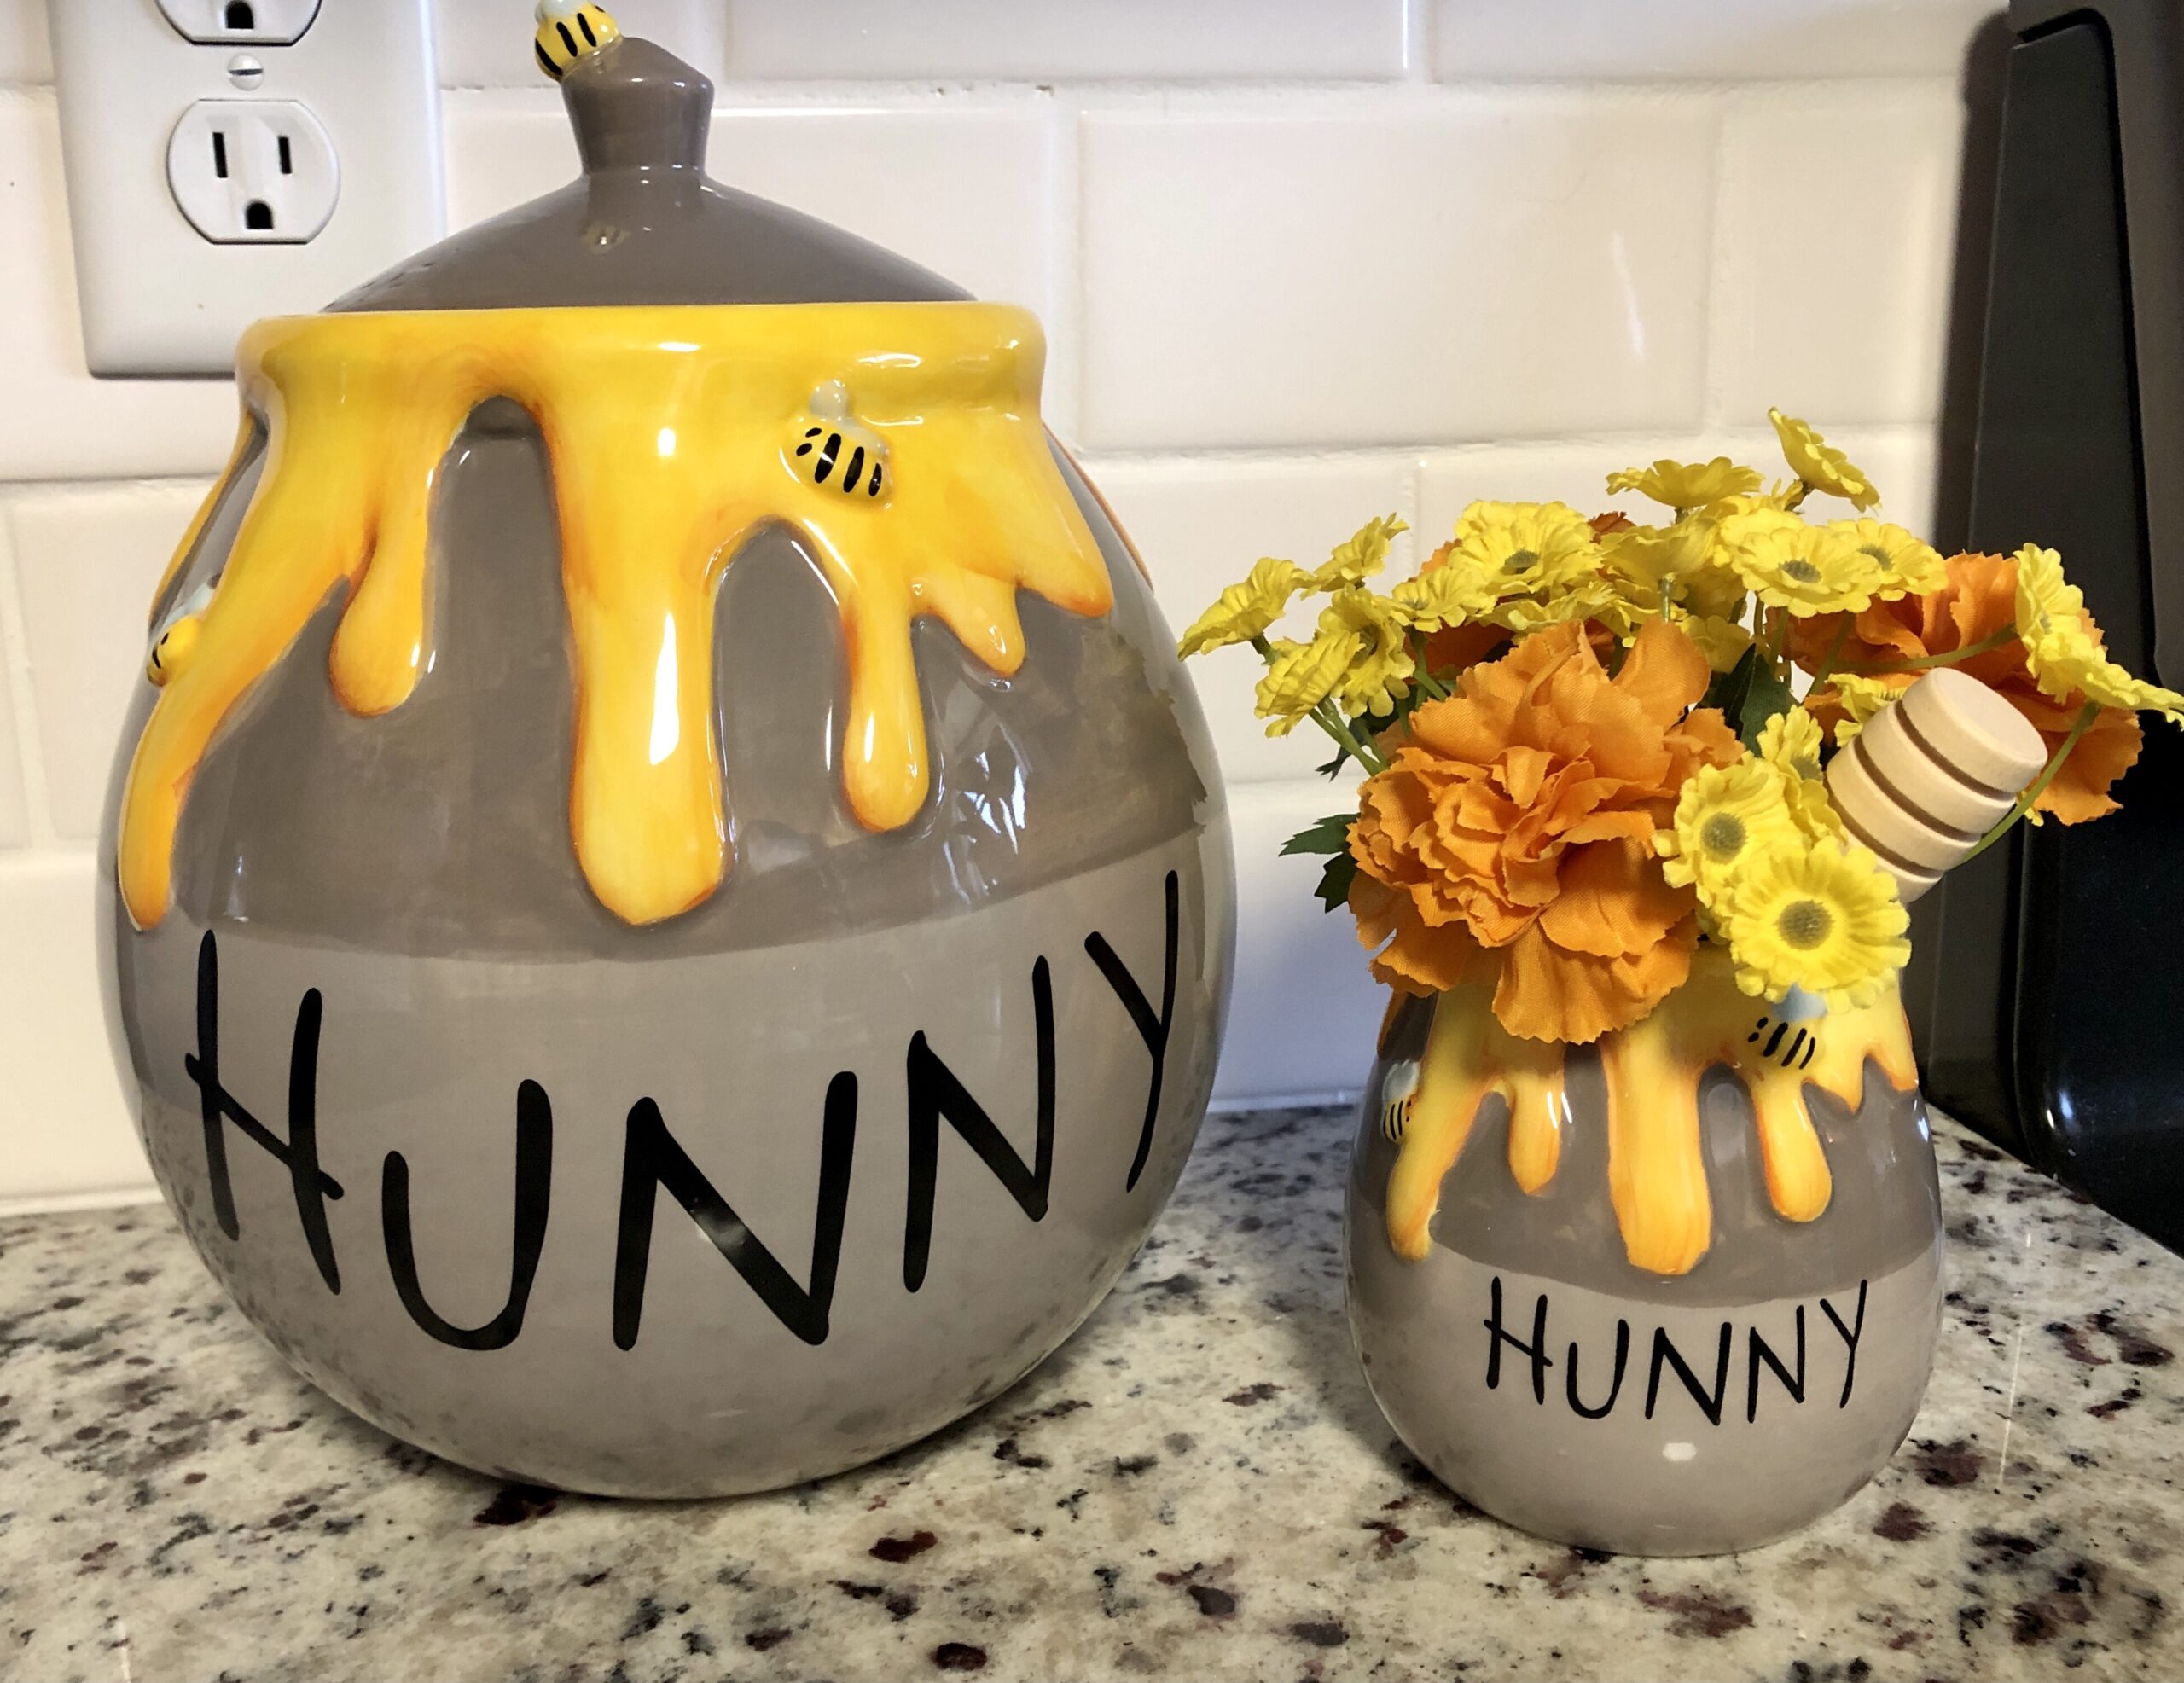 Springs Creative - Winnie The Pooh and Hunny Jar- Authentic Disney